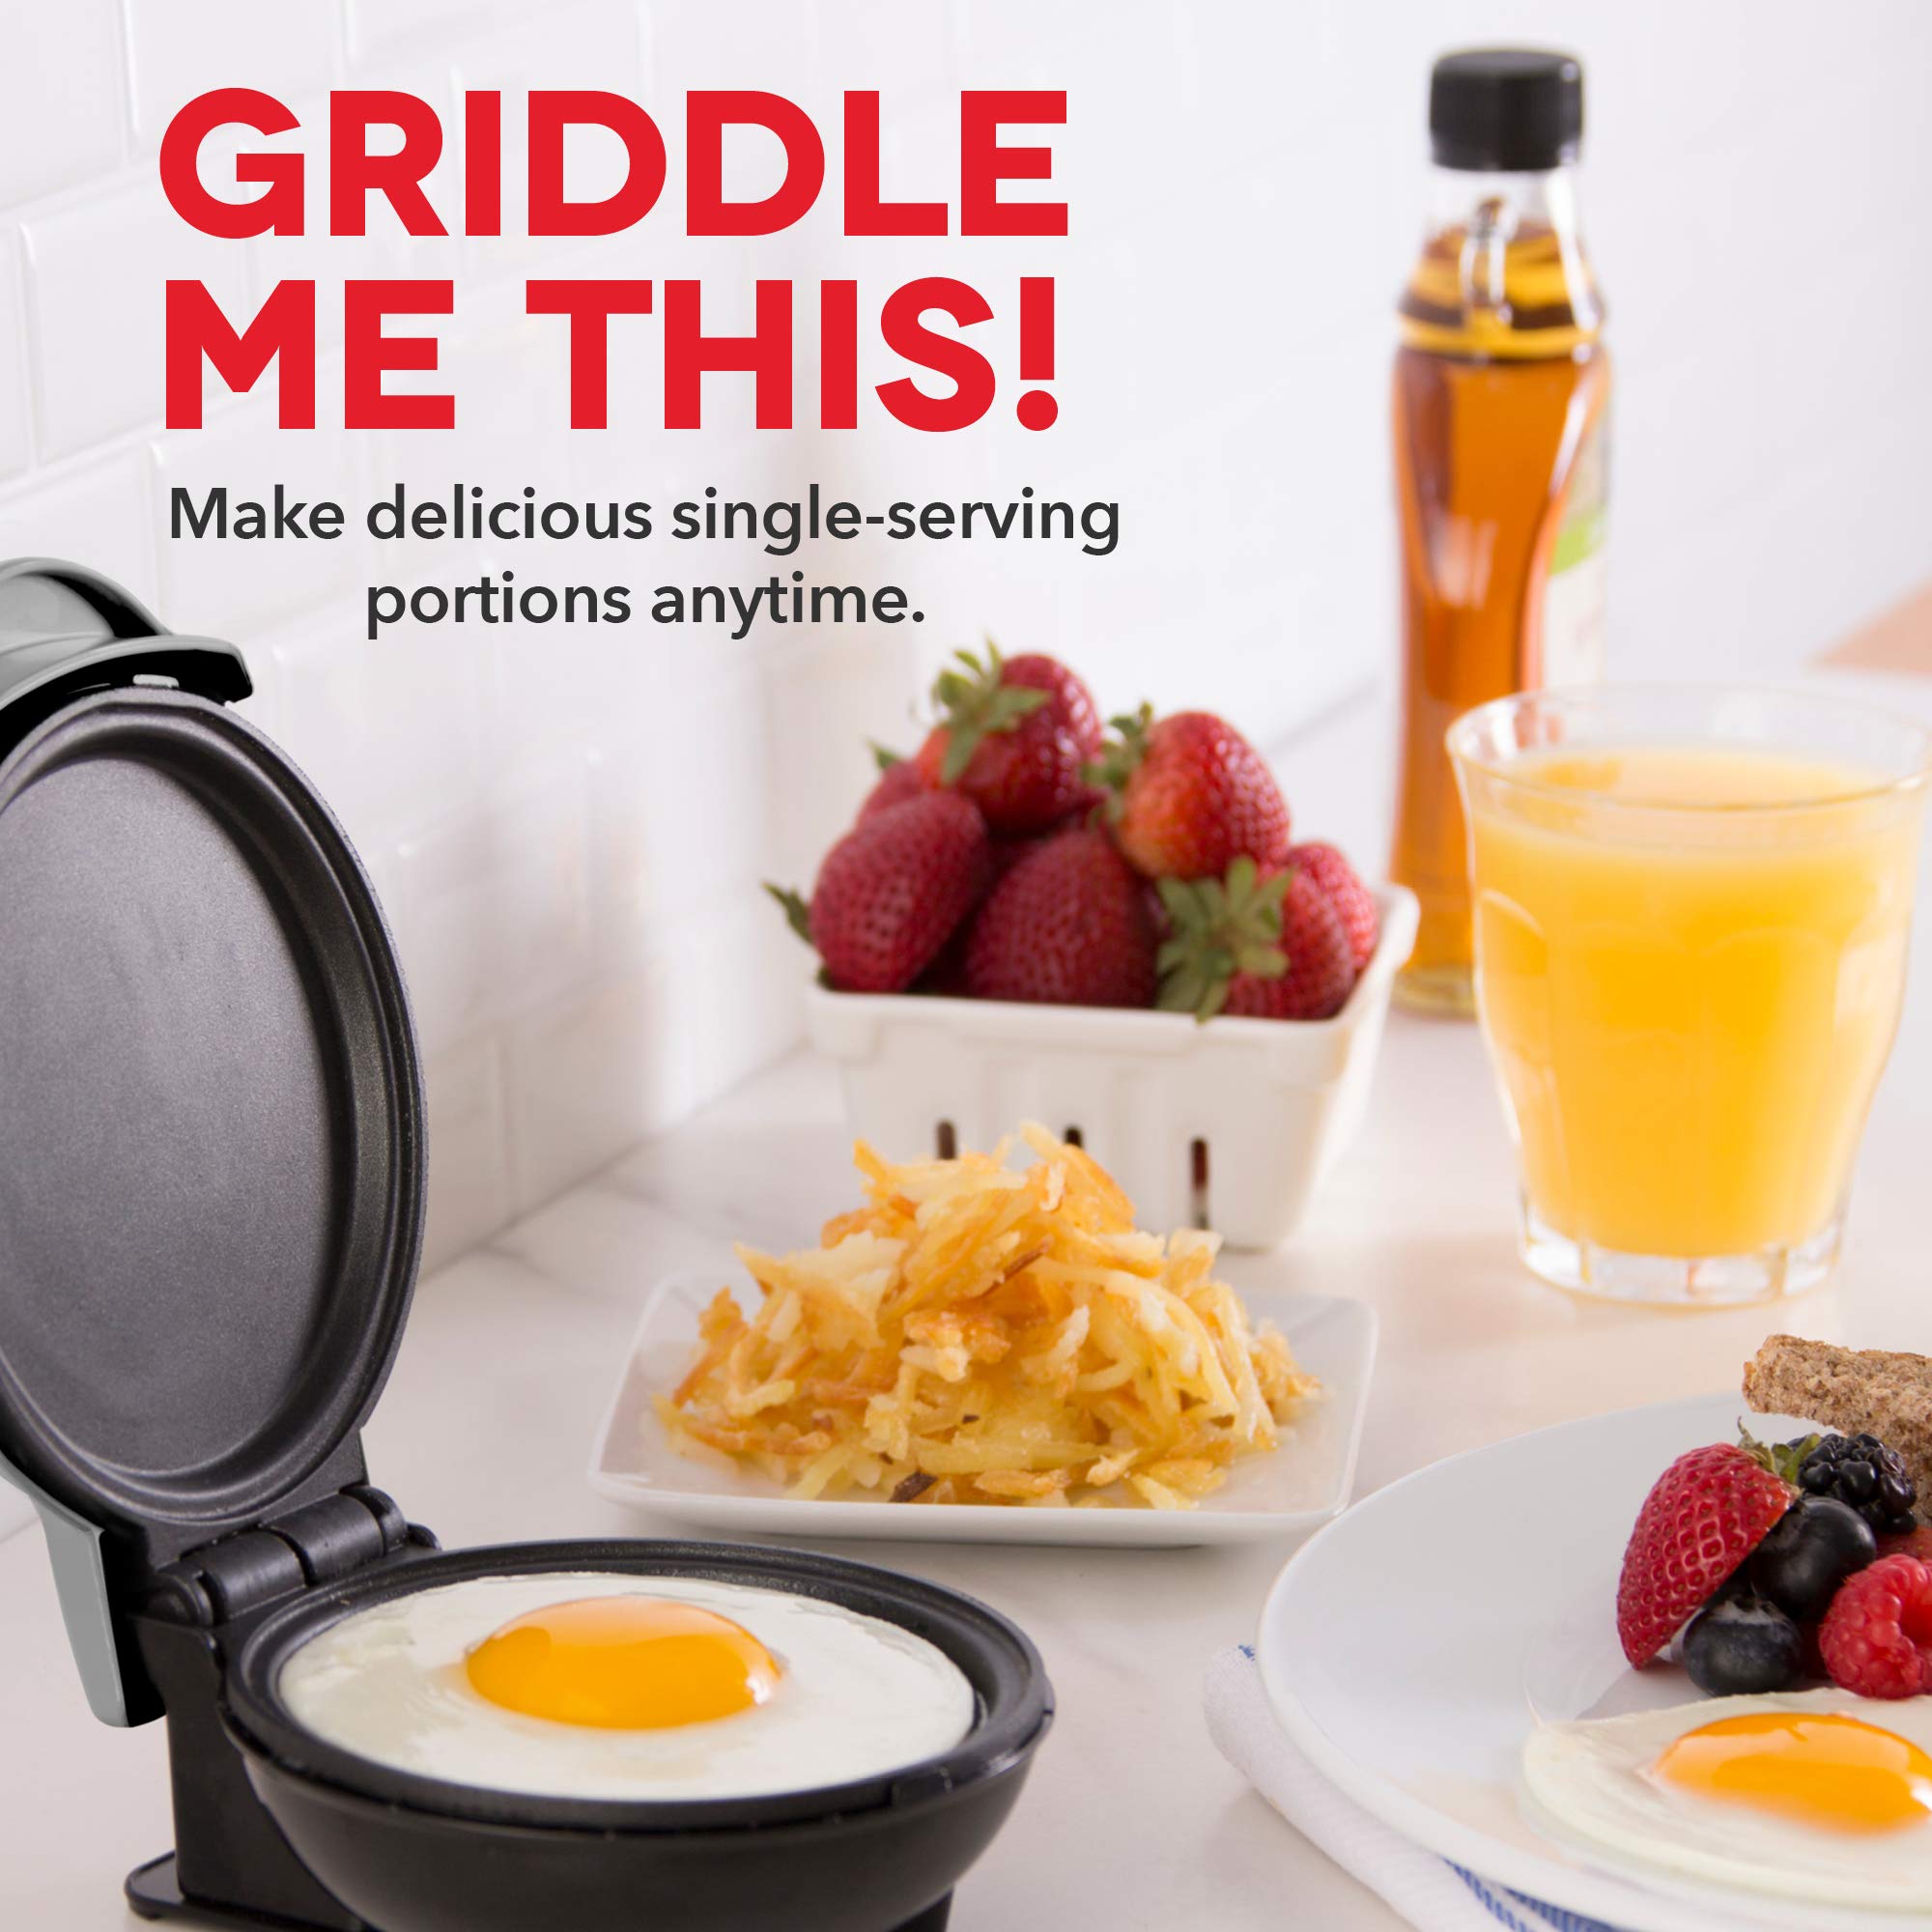 DASH Mini Griddle and Waffle Maker Bundle - Make Individual Pancakes, Cookies, Eggs, Waffles and More